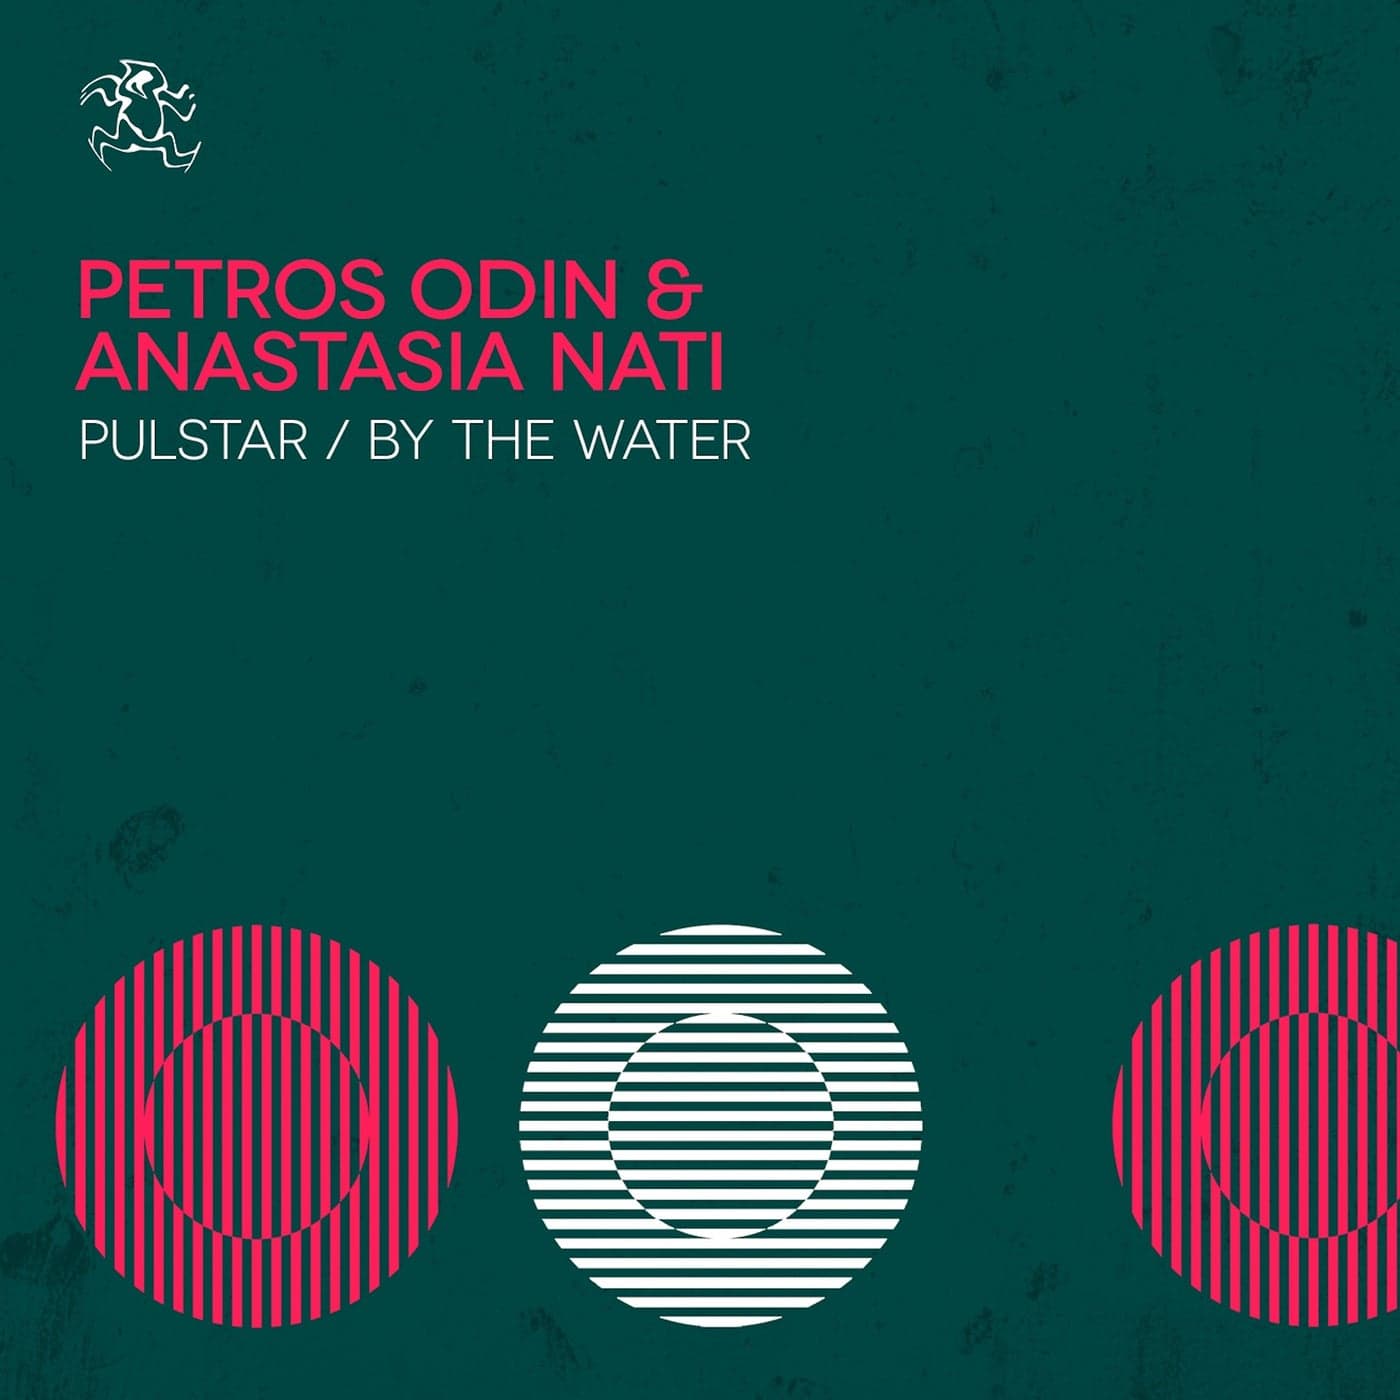 Download Petros Odin, Anastasia Nati - Pulstar / By The Water on Electrobuzz